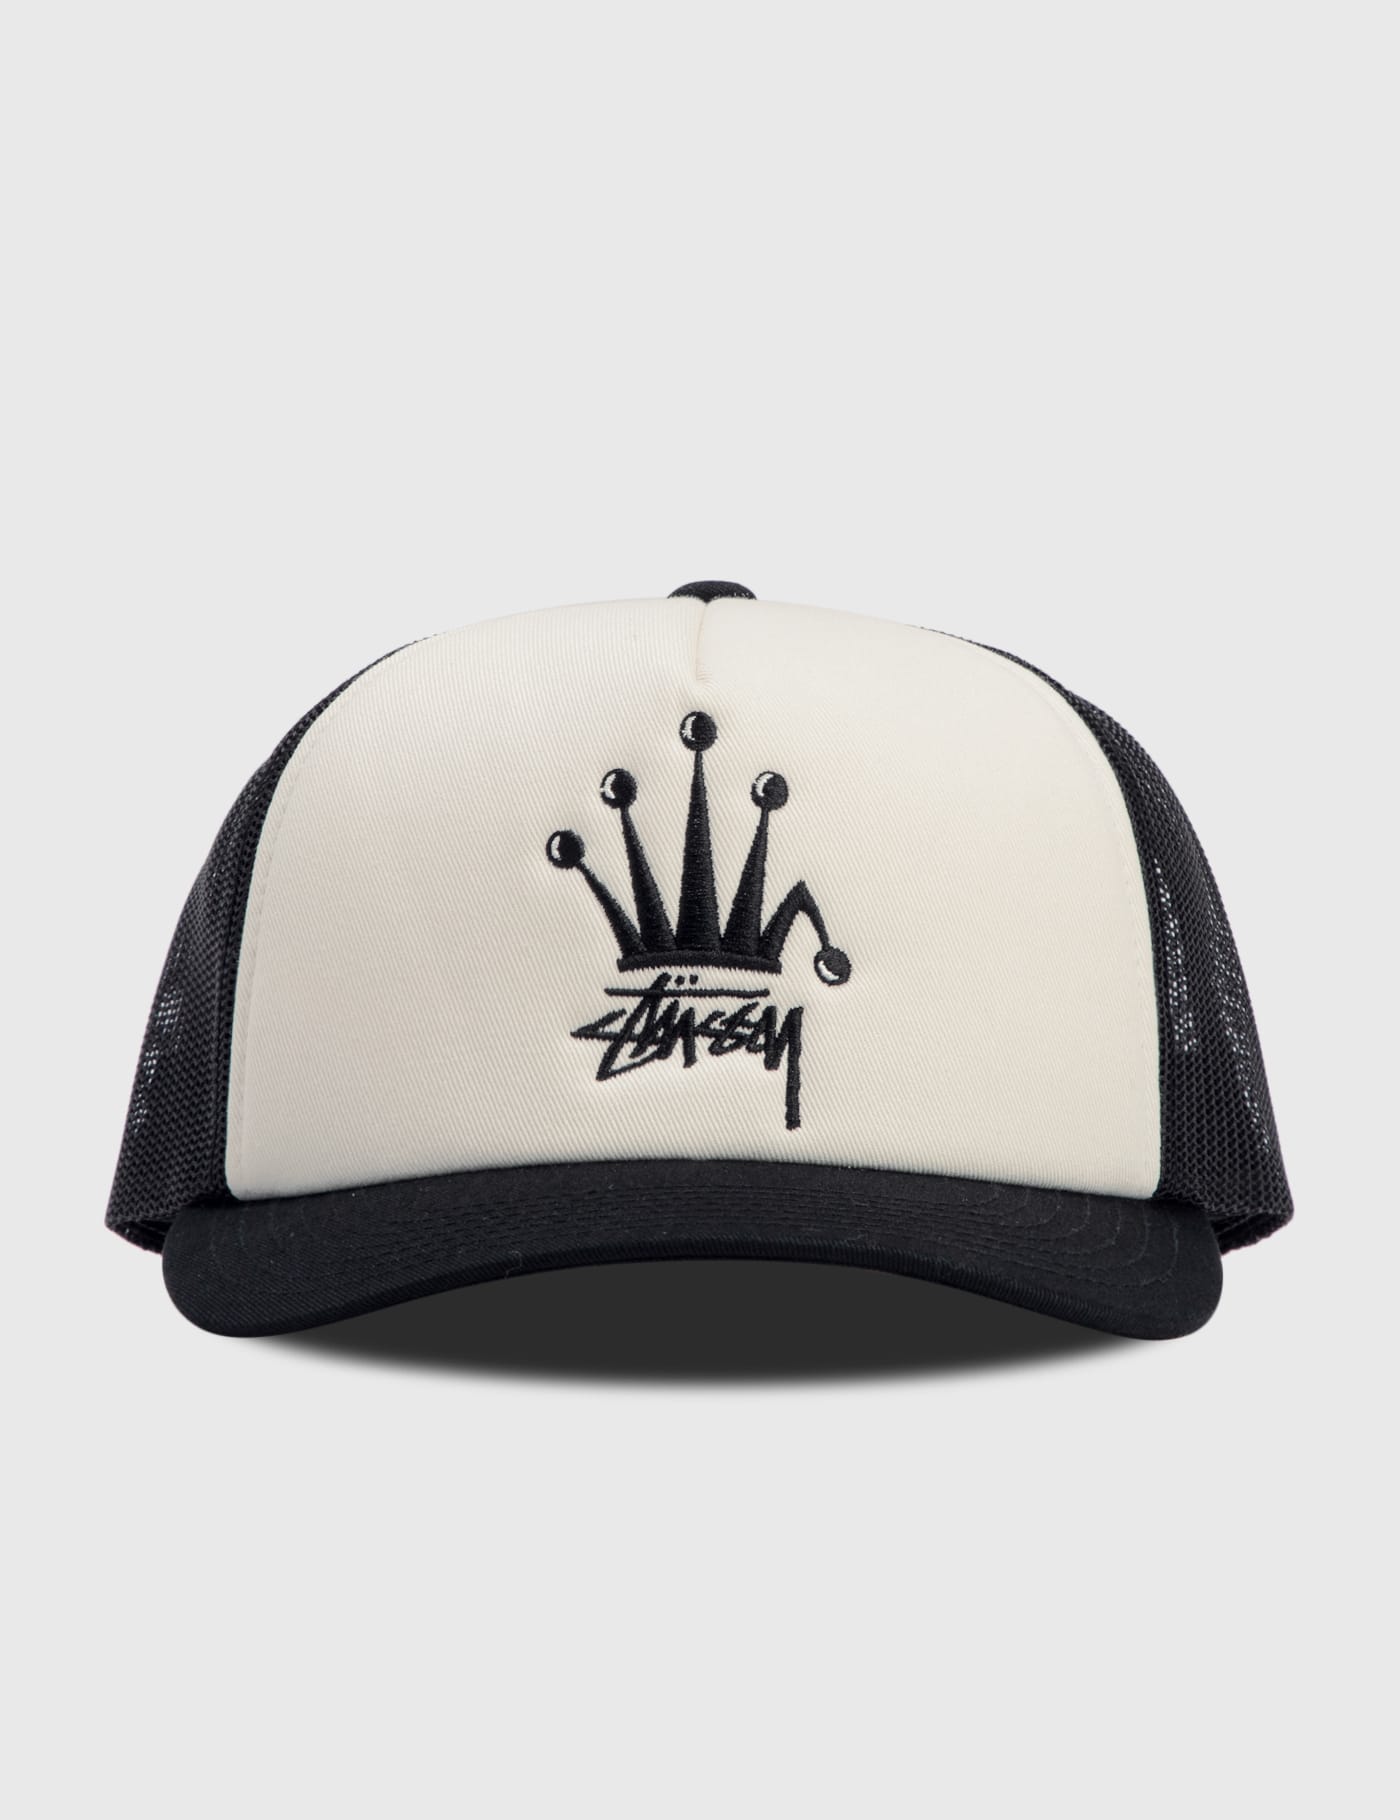 Stüssy - Crown Stock Trucker Cap | HBX - Globally Curated Fashion 